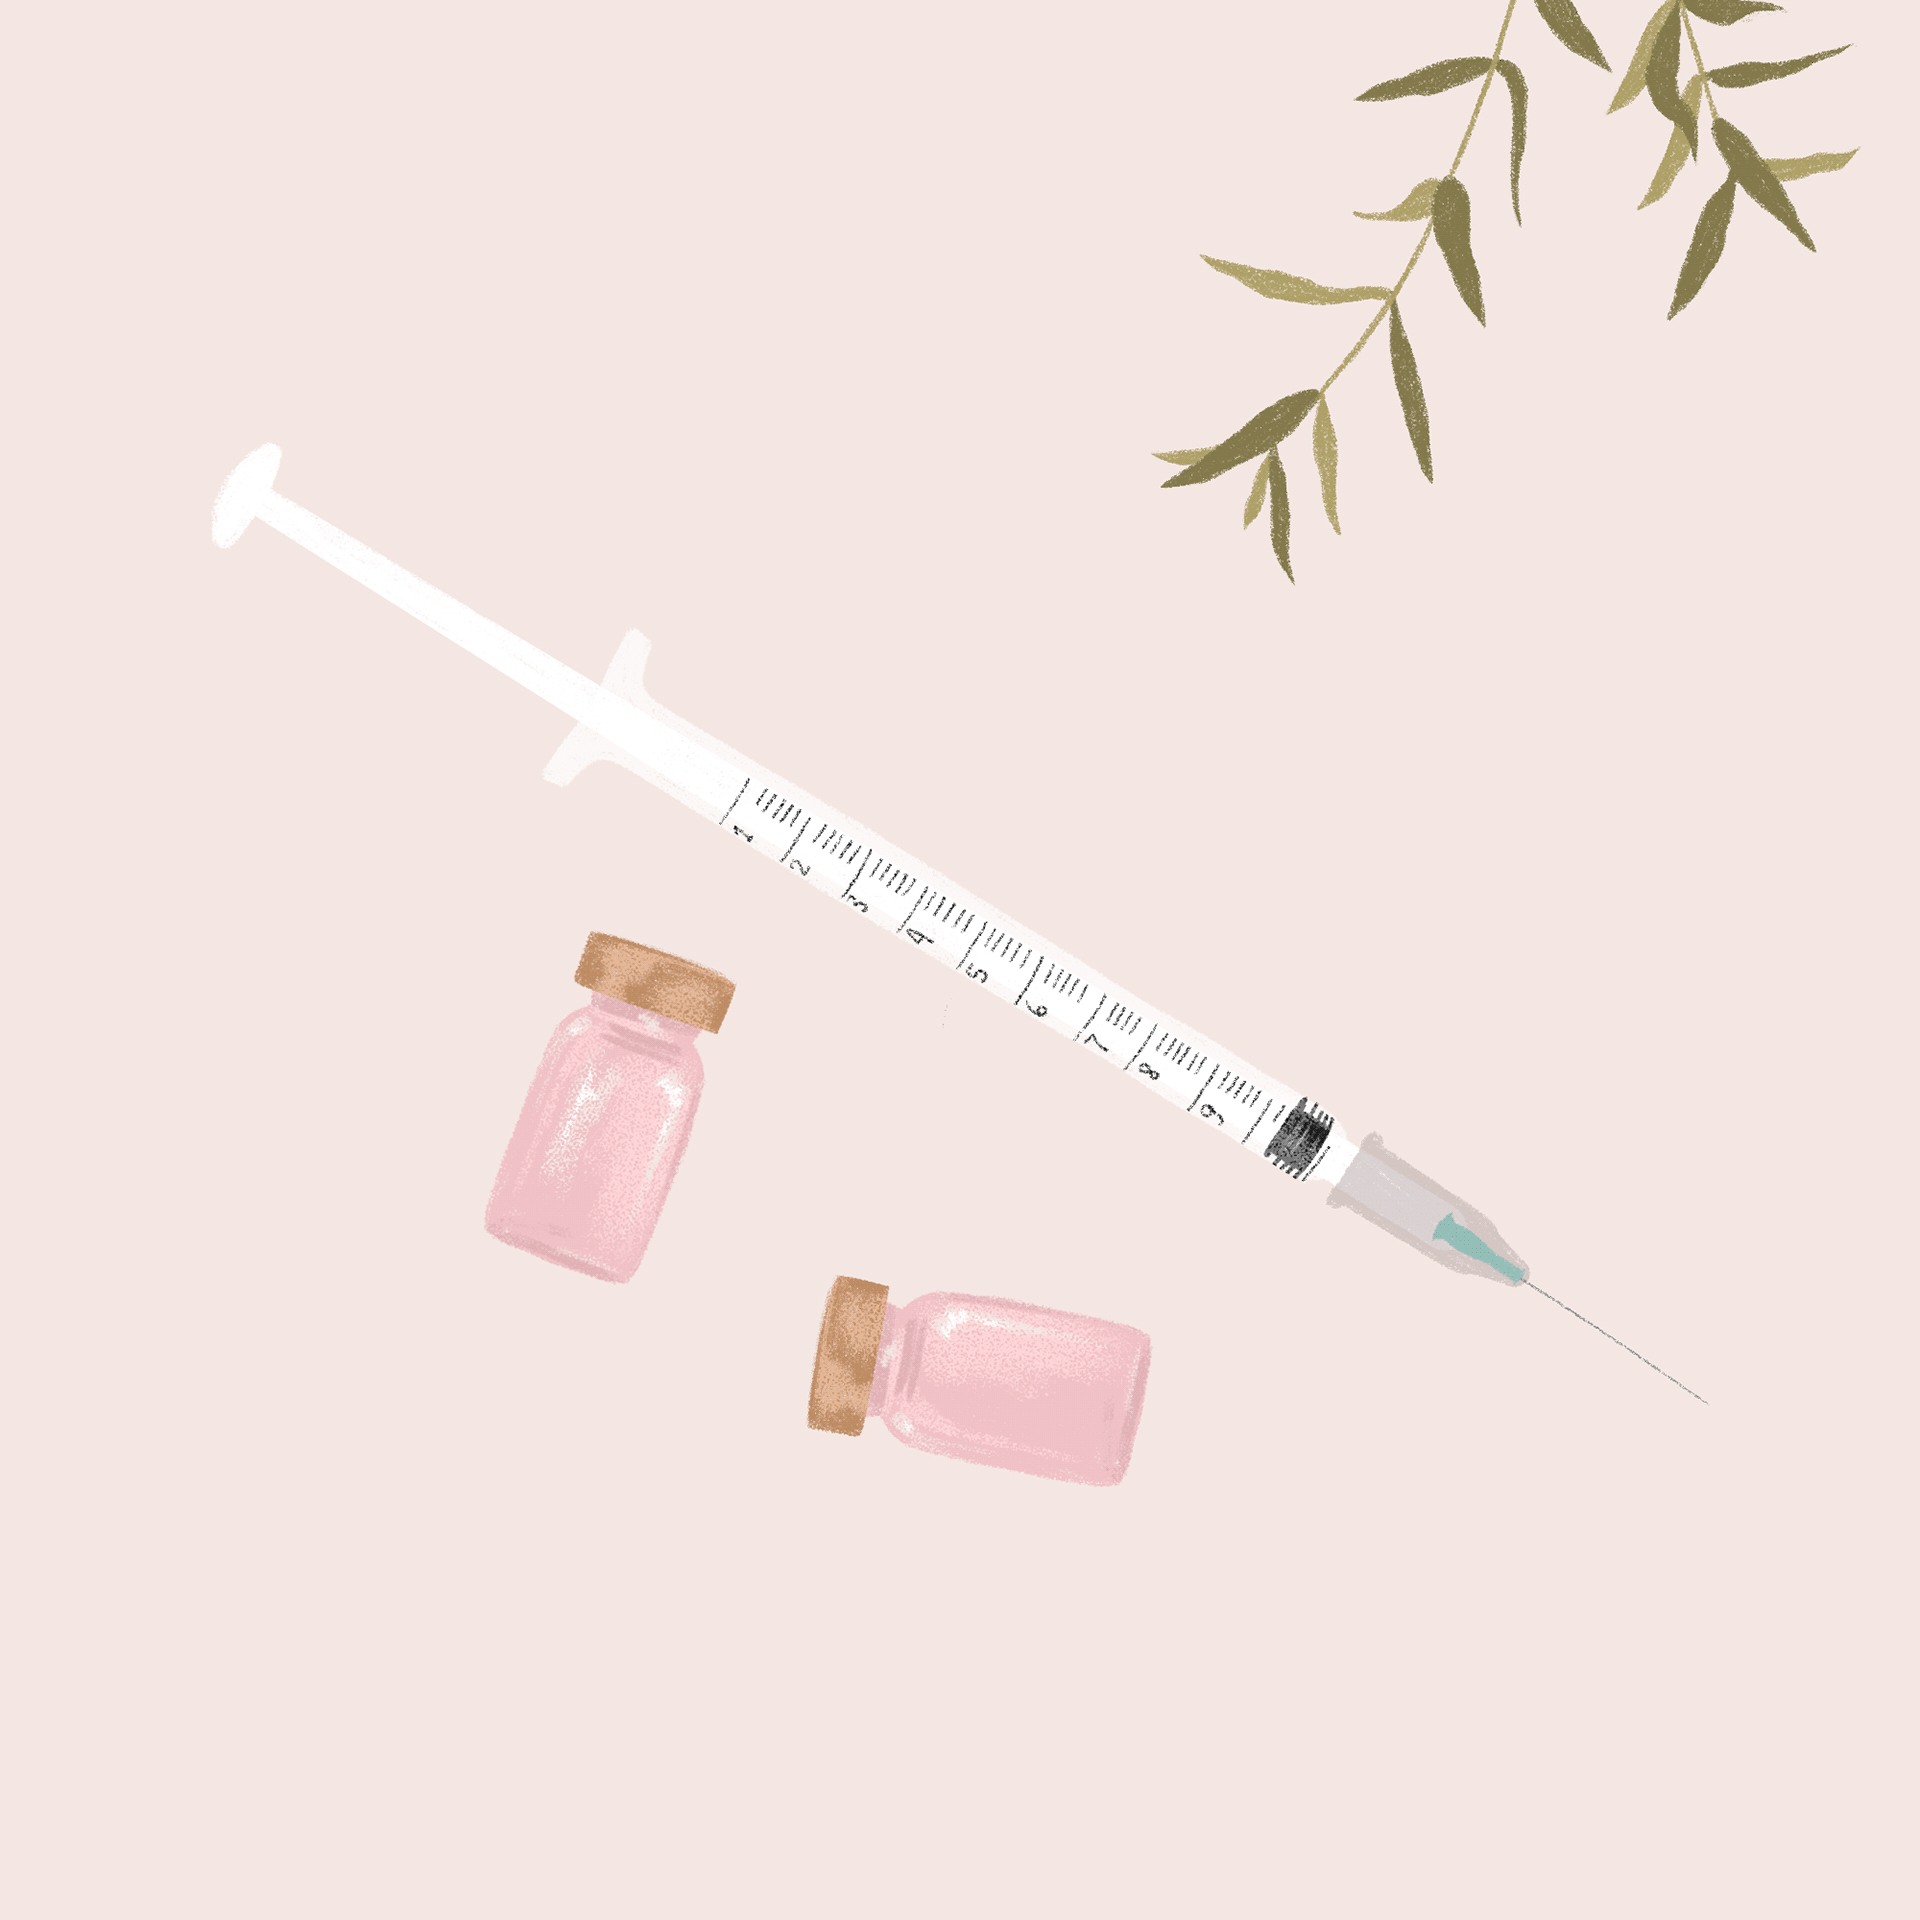 A syringe, two pink bottles and some green leaves - Nurse